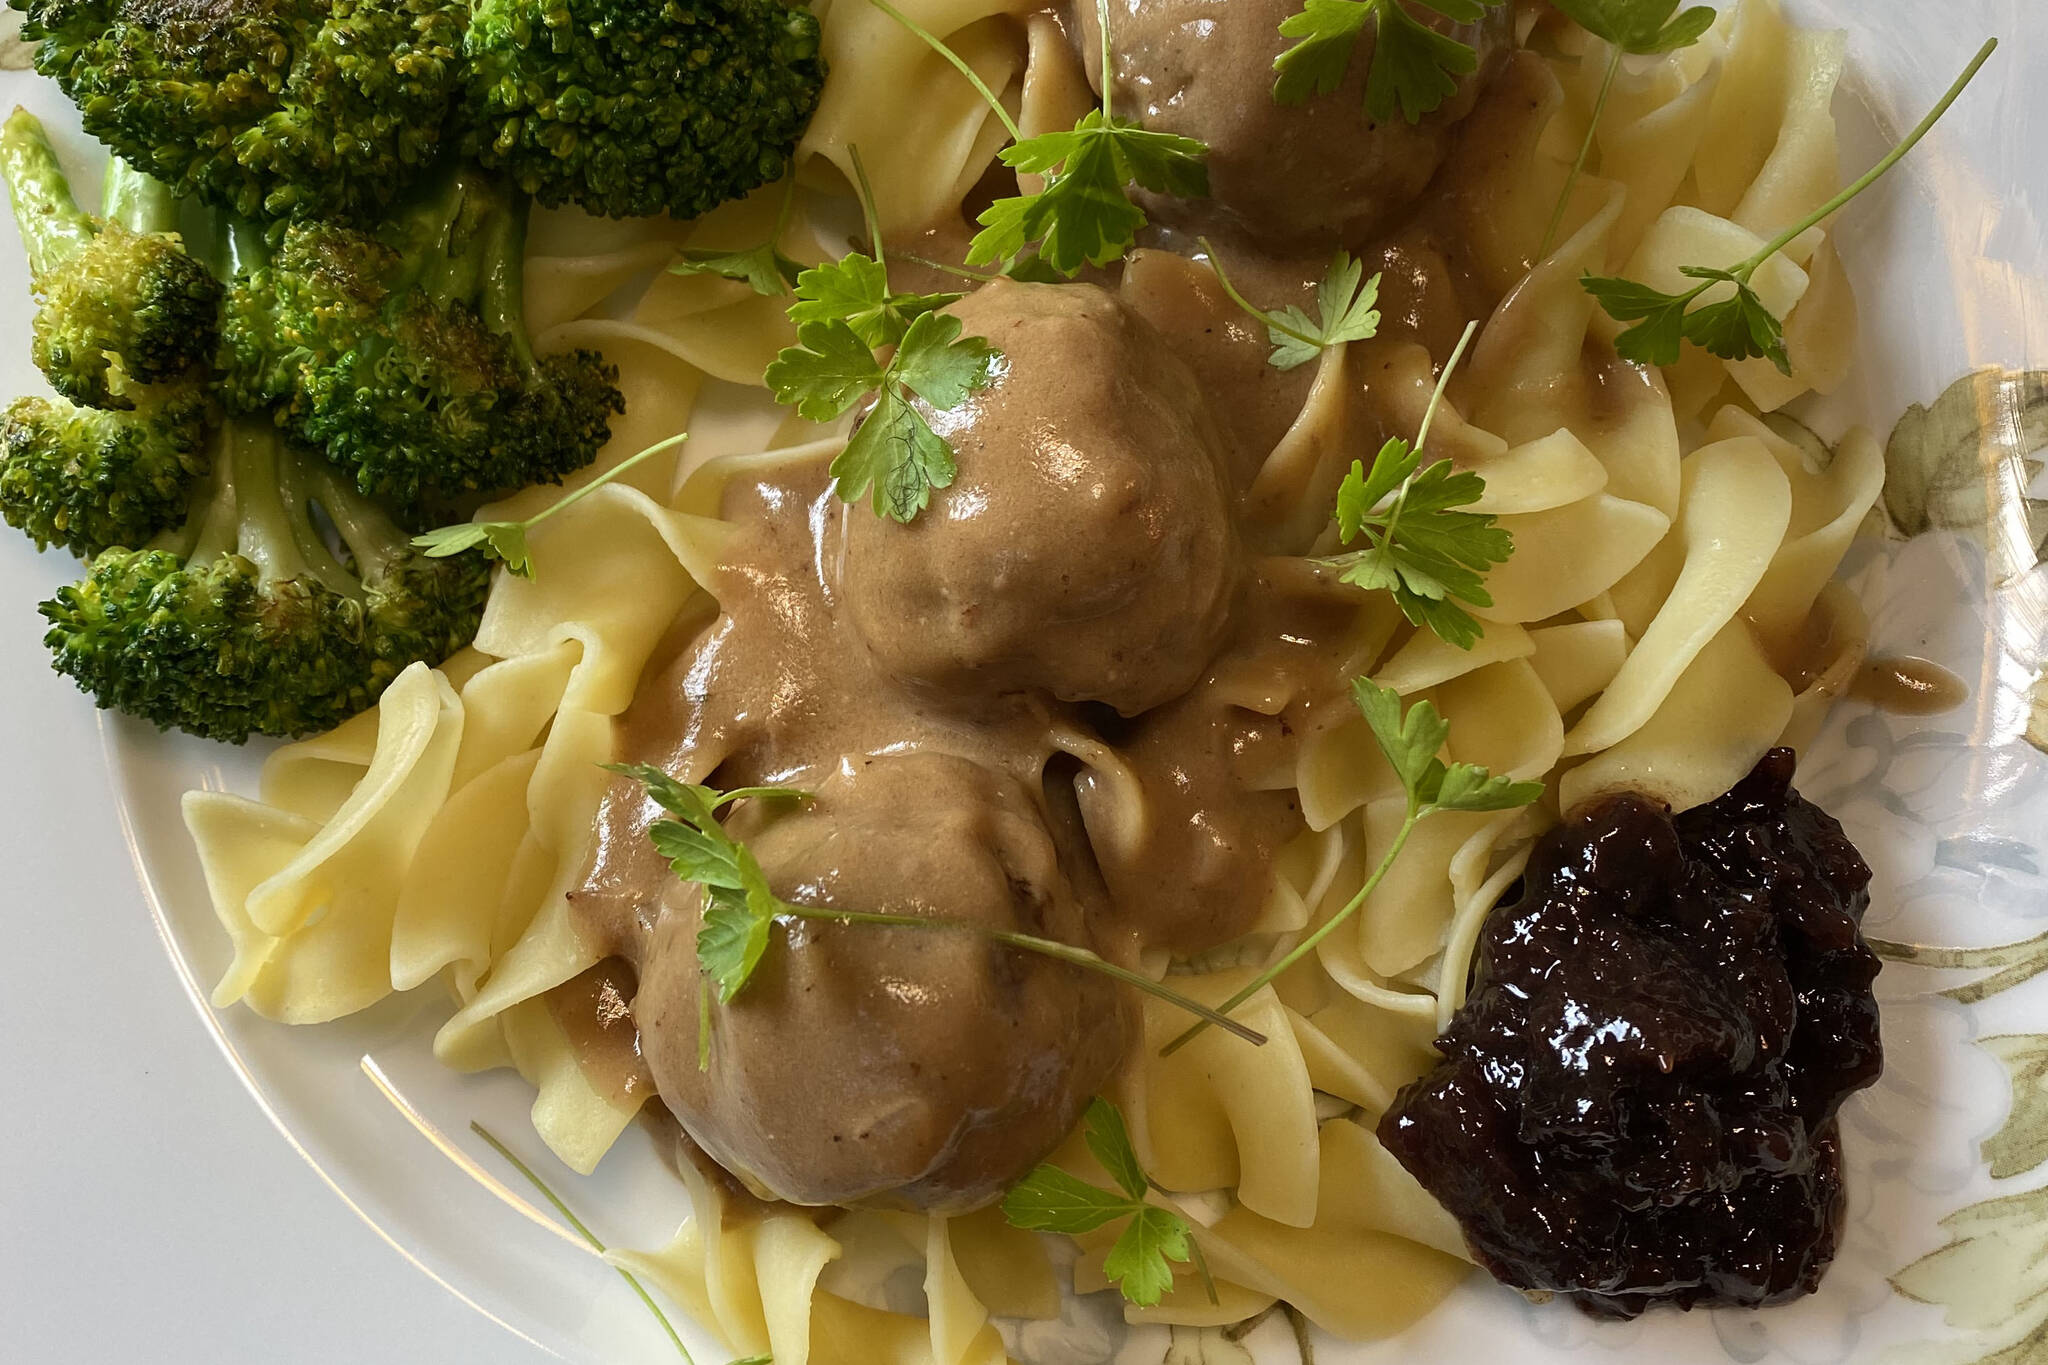 This version of Swedish meatballs features larger meatballs made of all beef instead of the traditional beef/pork combination. (Photo by Tressa Dale/Peninsula Clarion)